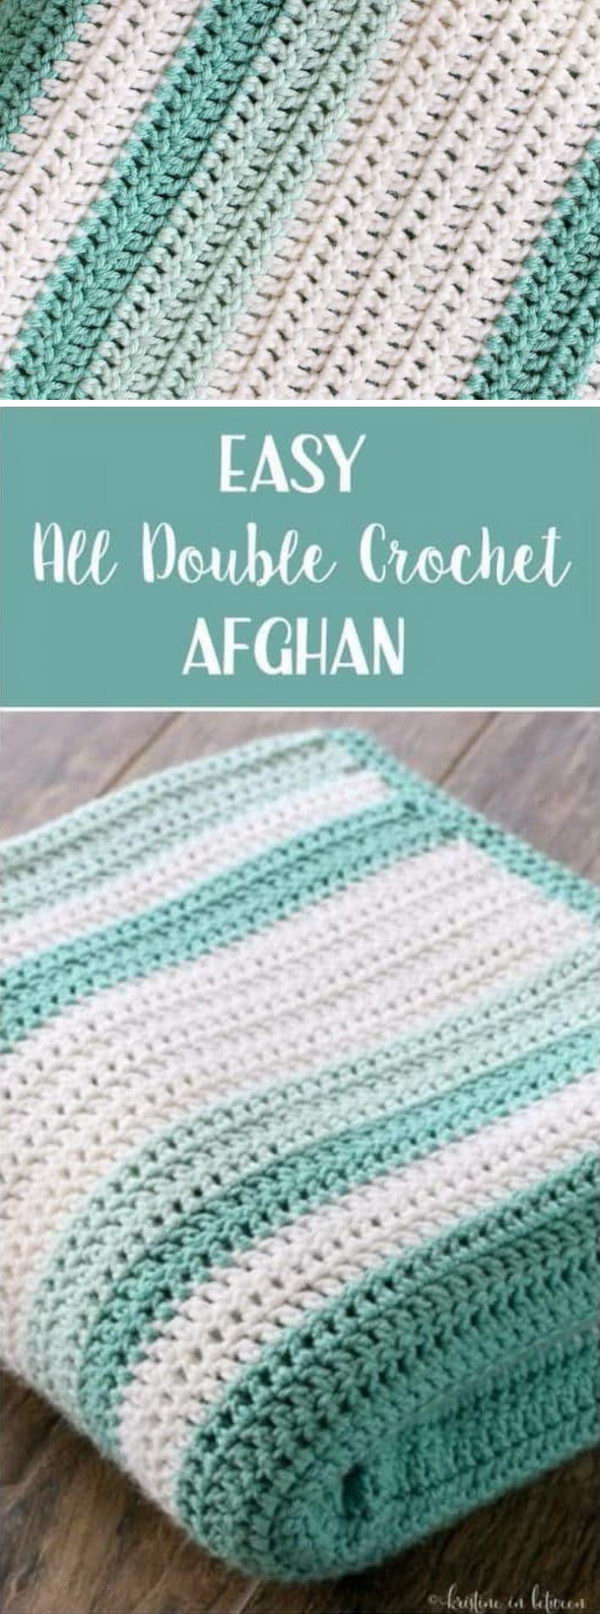 Simple Beginner Afghan With All Double Crochet Stitches. 